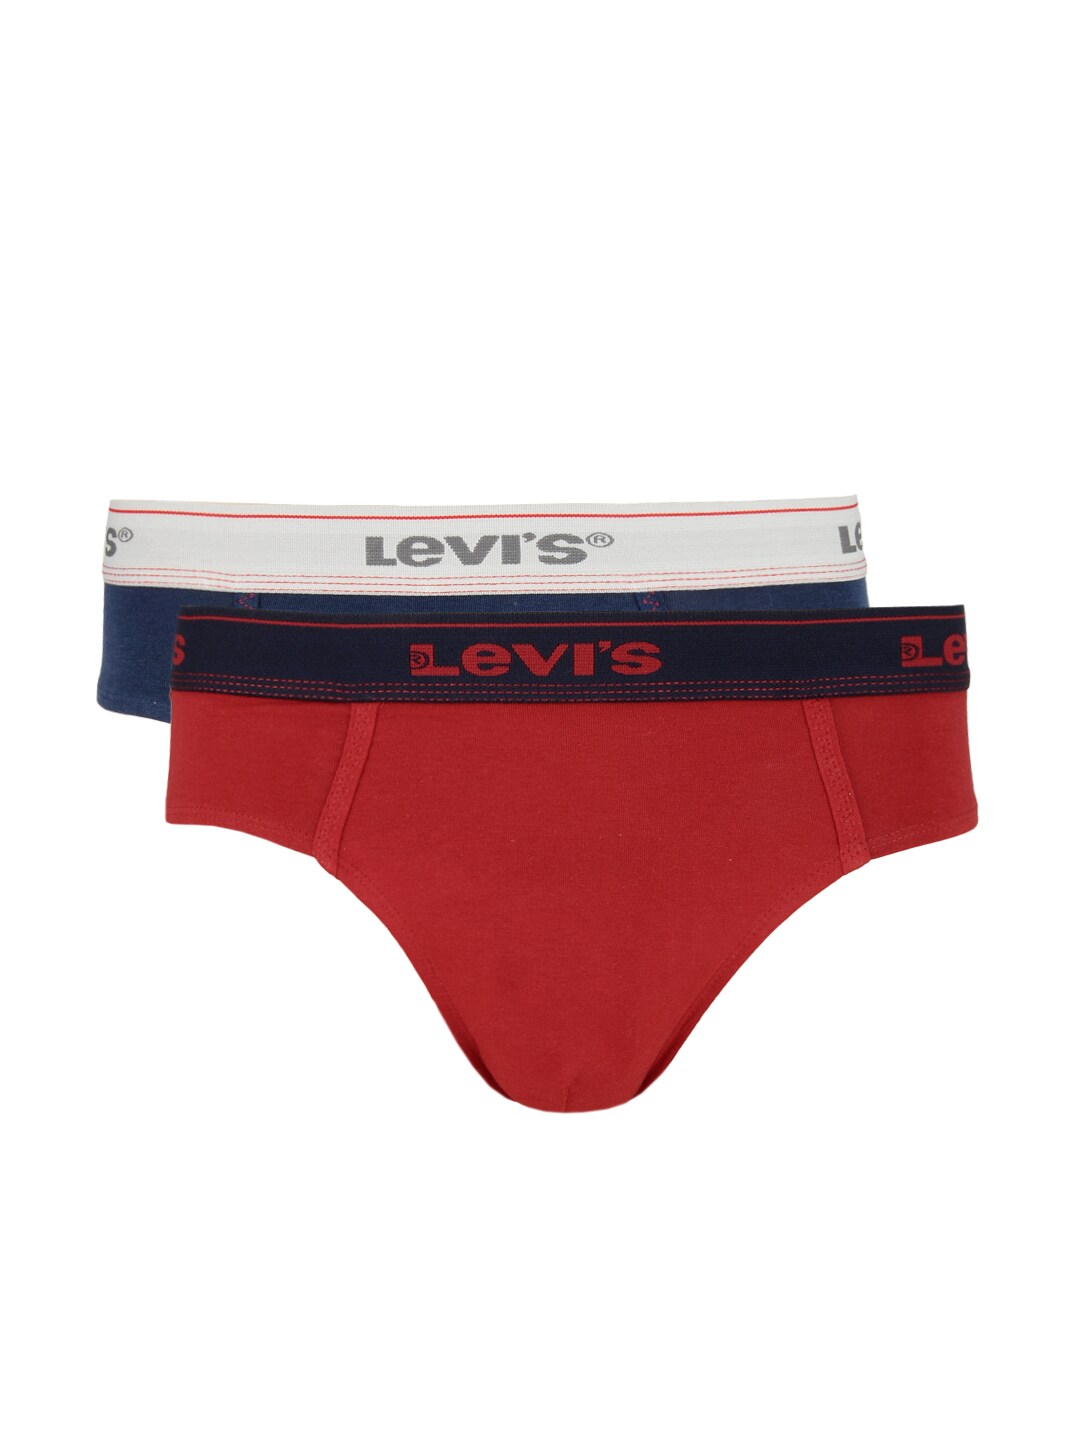 Levis Men Pack of Two Blue and Red Briefs